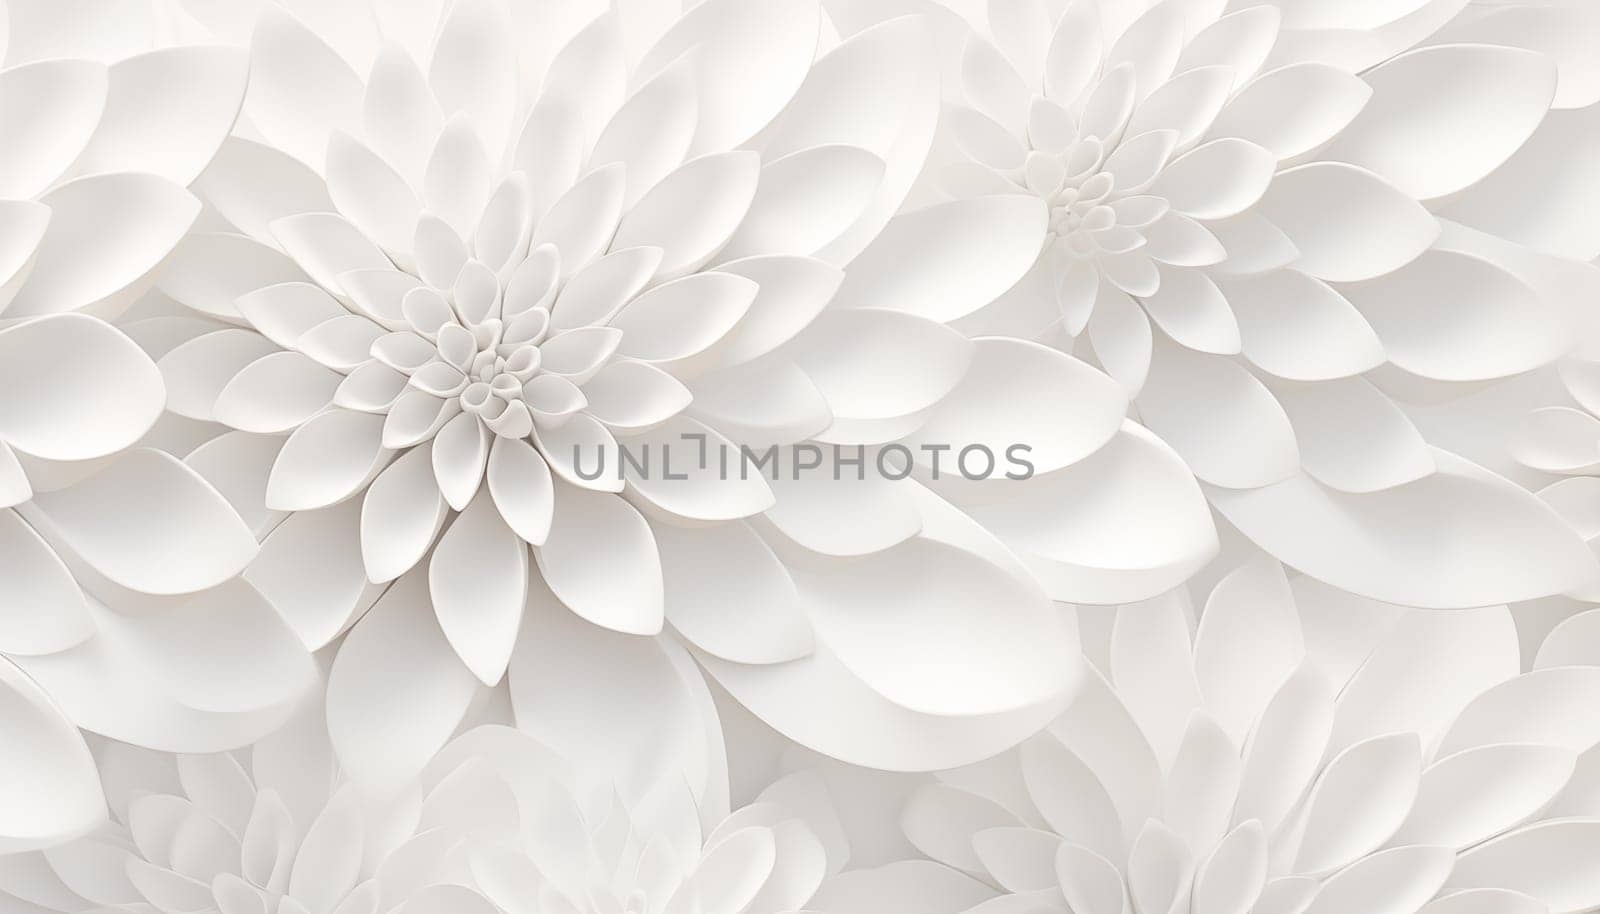 White background flowers texture. High quality photo